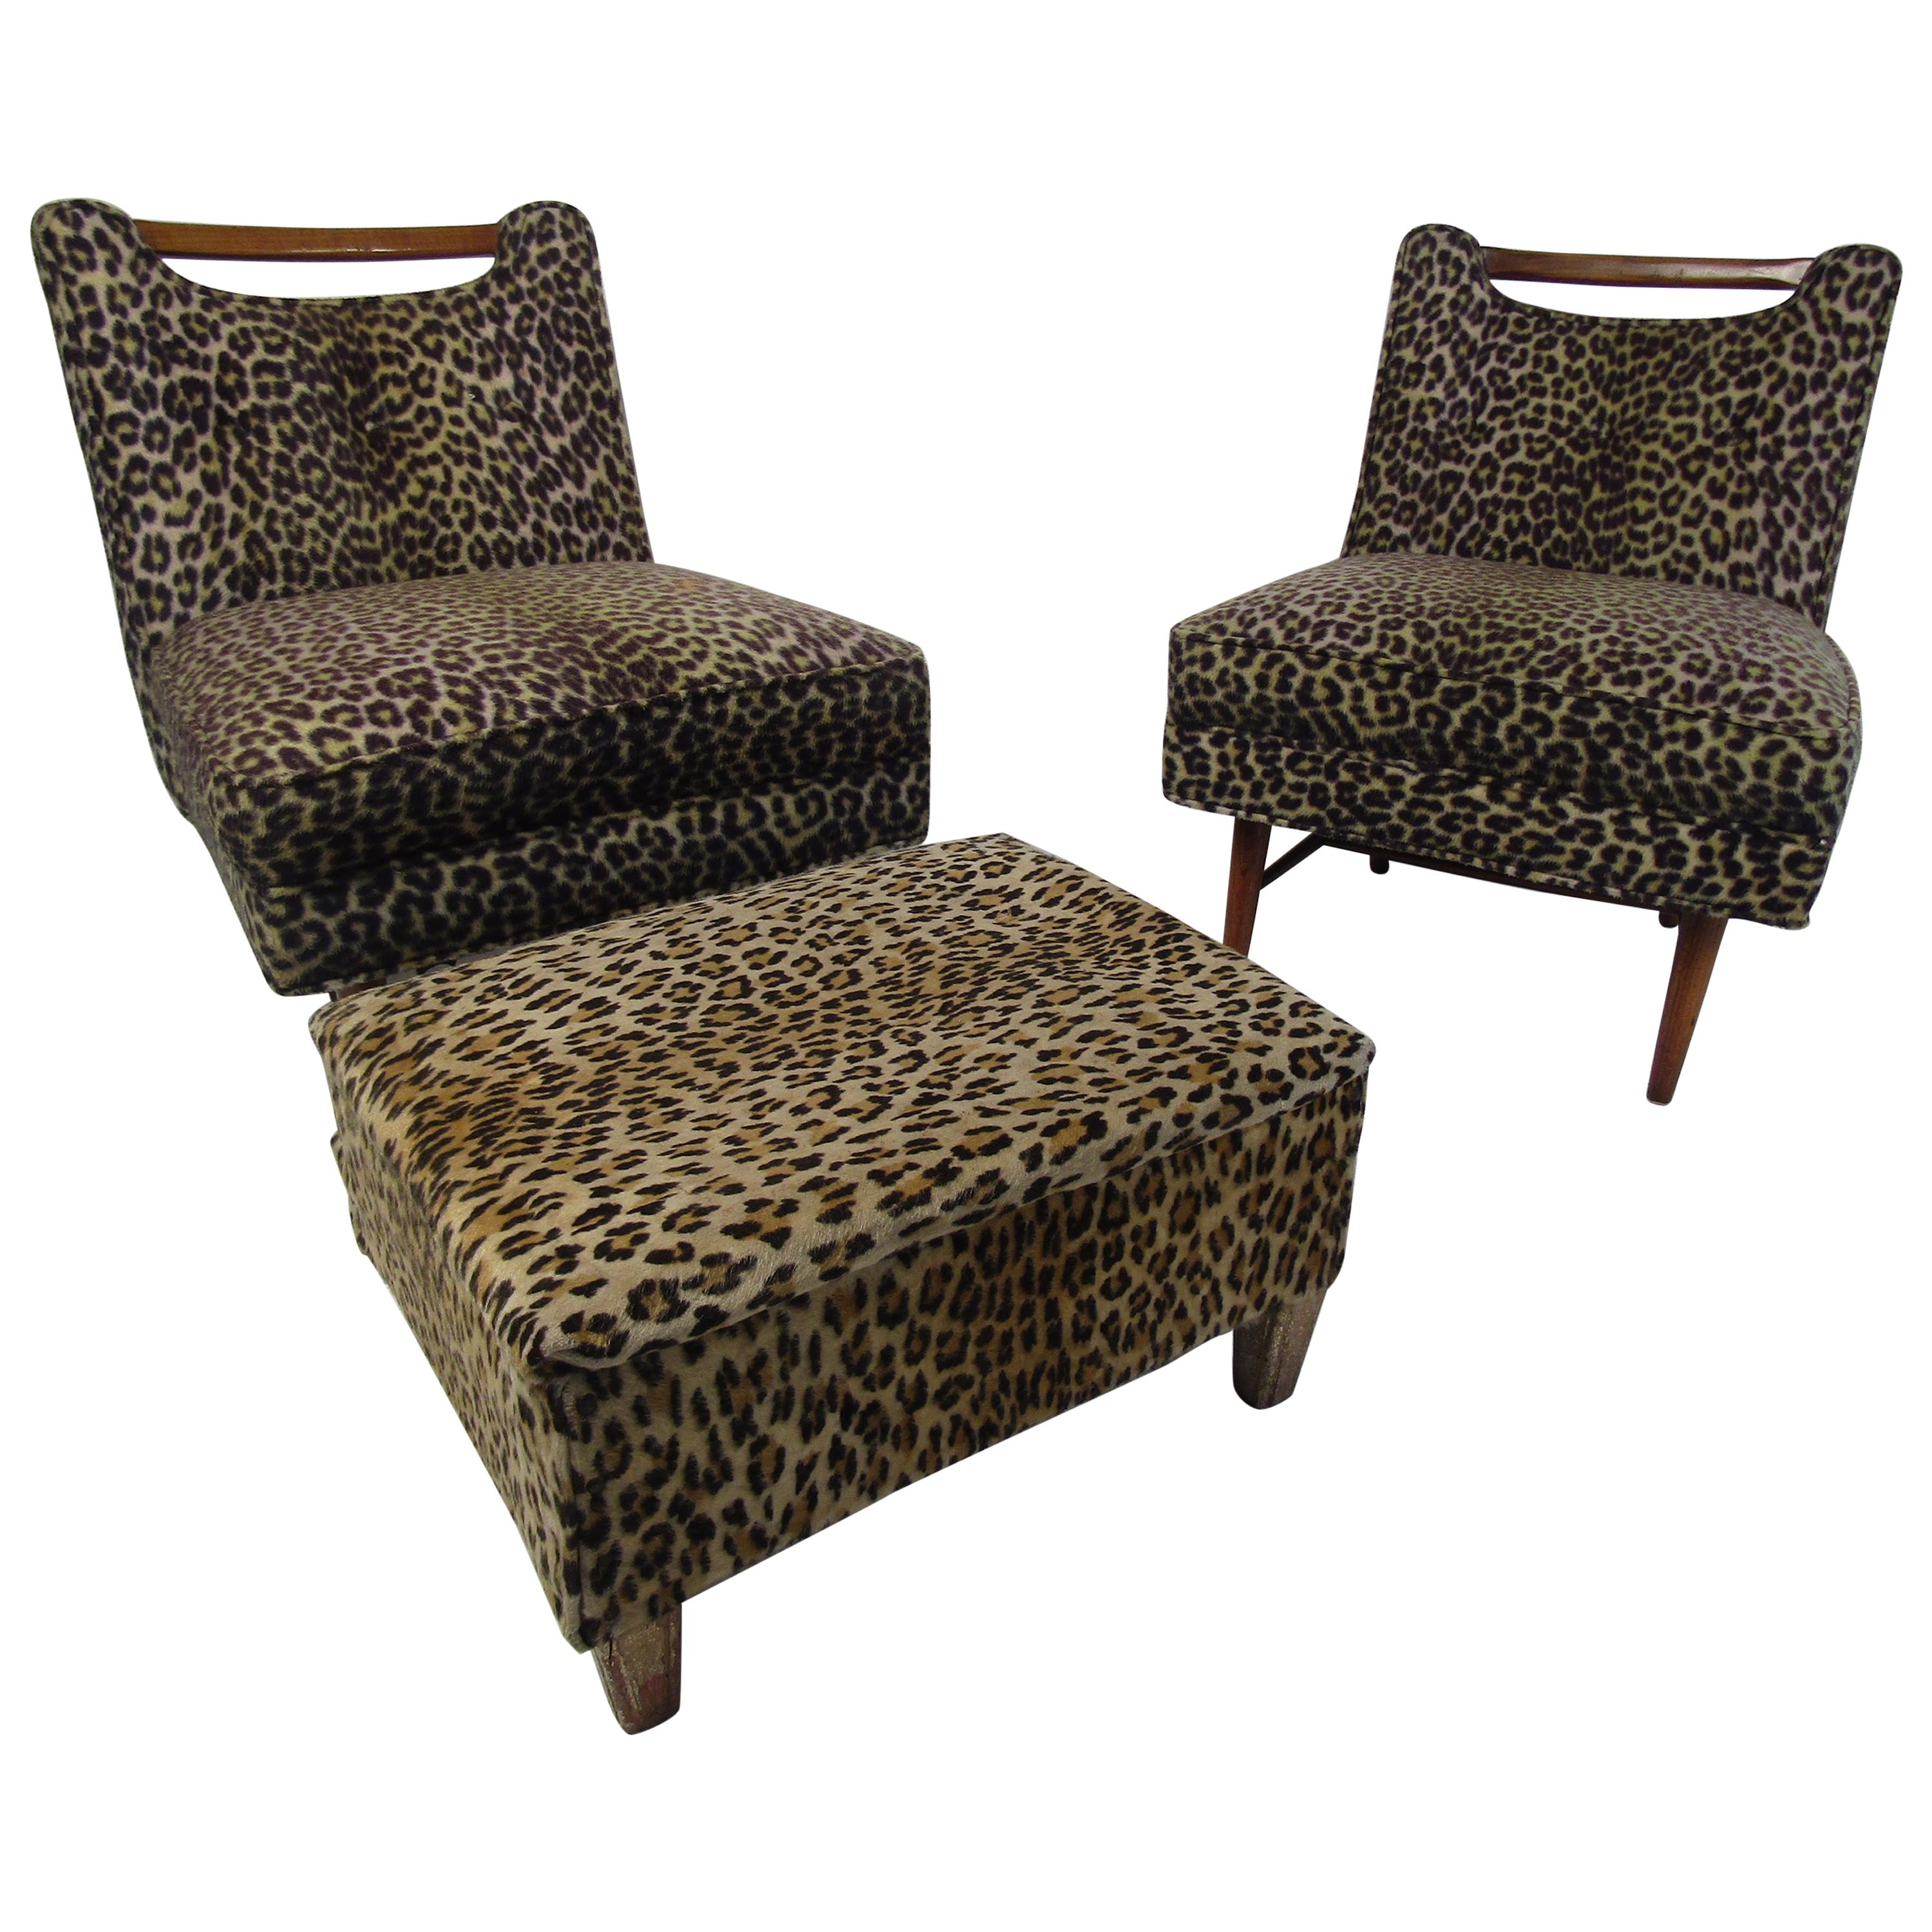 Pair of Midcentury Leopard Print Lounge Chairs with Ottoman For Sale